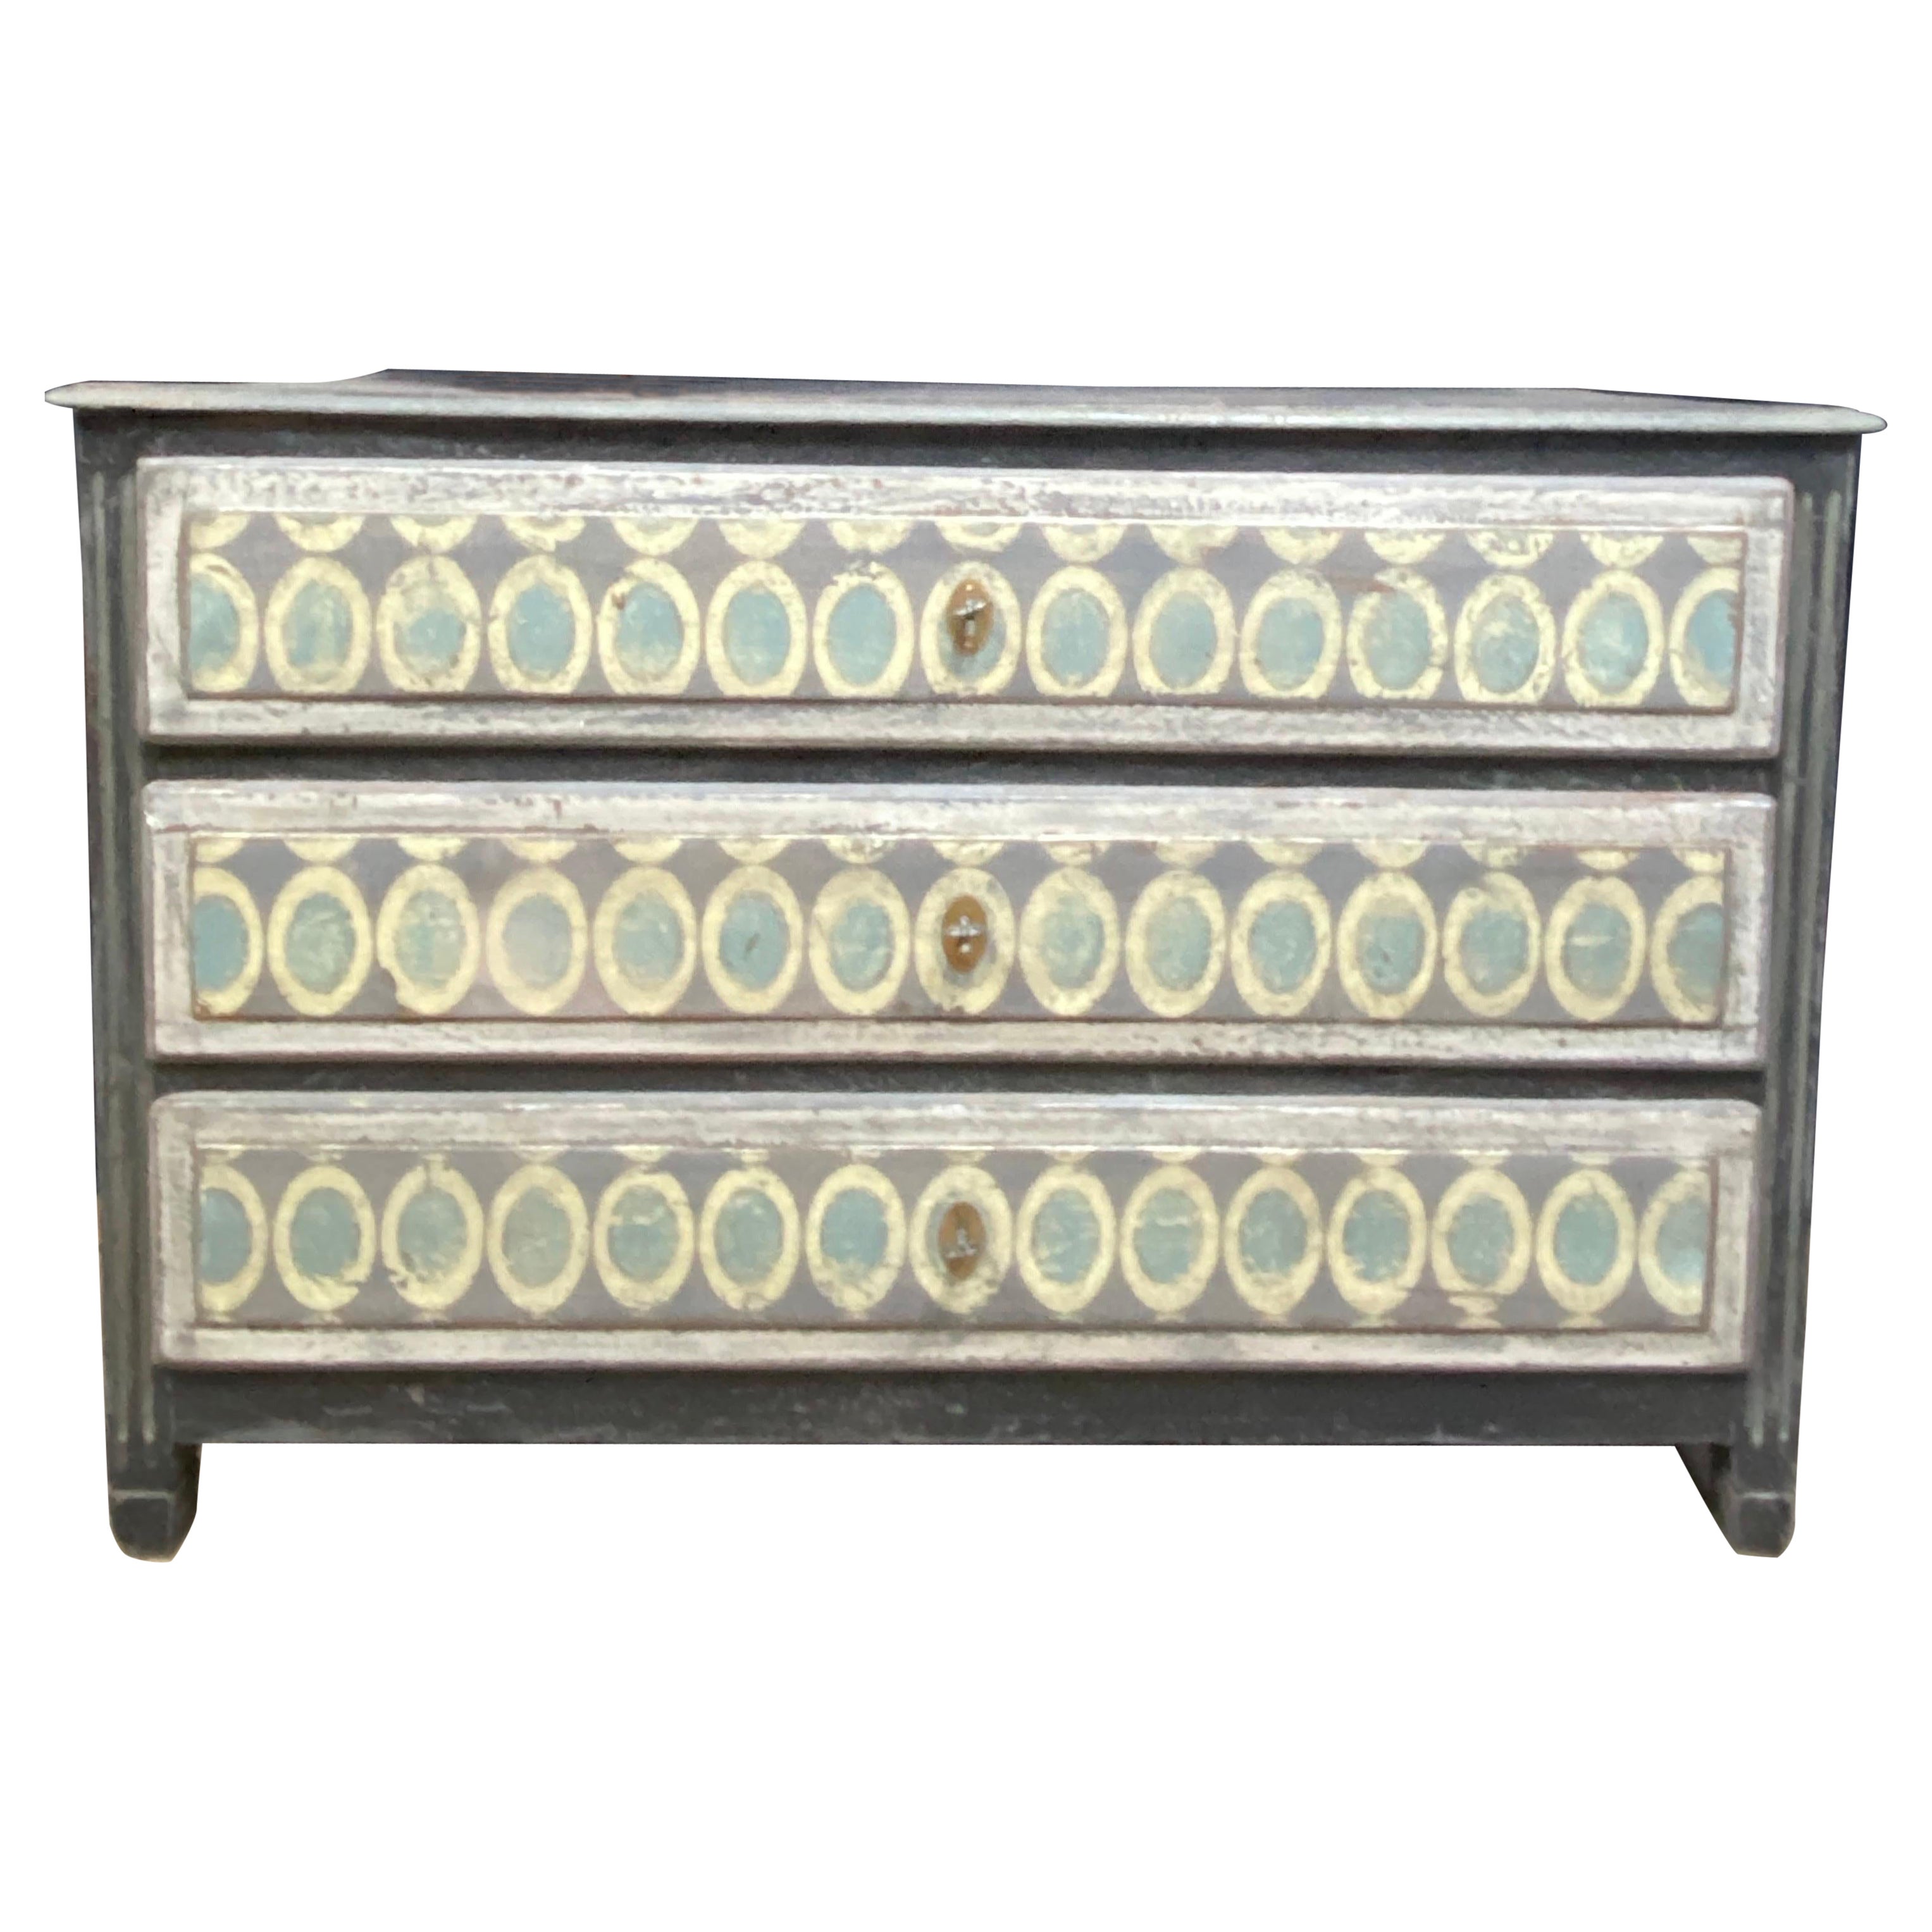 Louis xvi chest of drawers 3 patina drawers with different shapes and colors For Sale